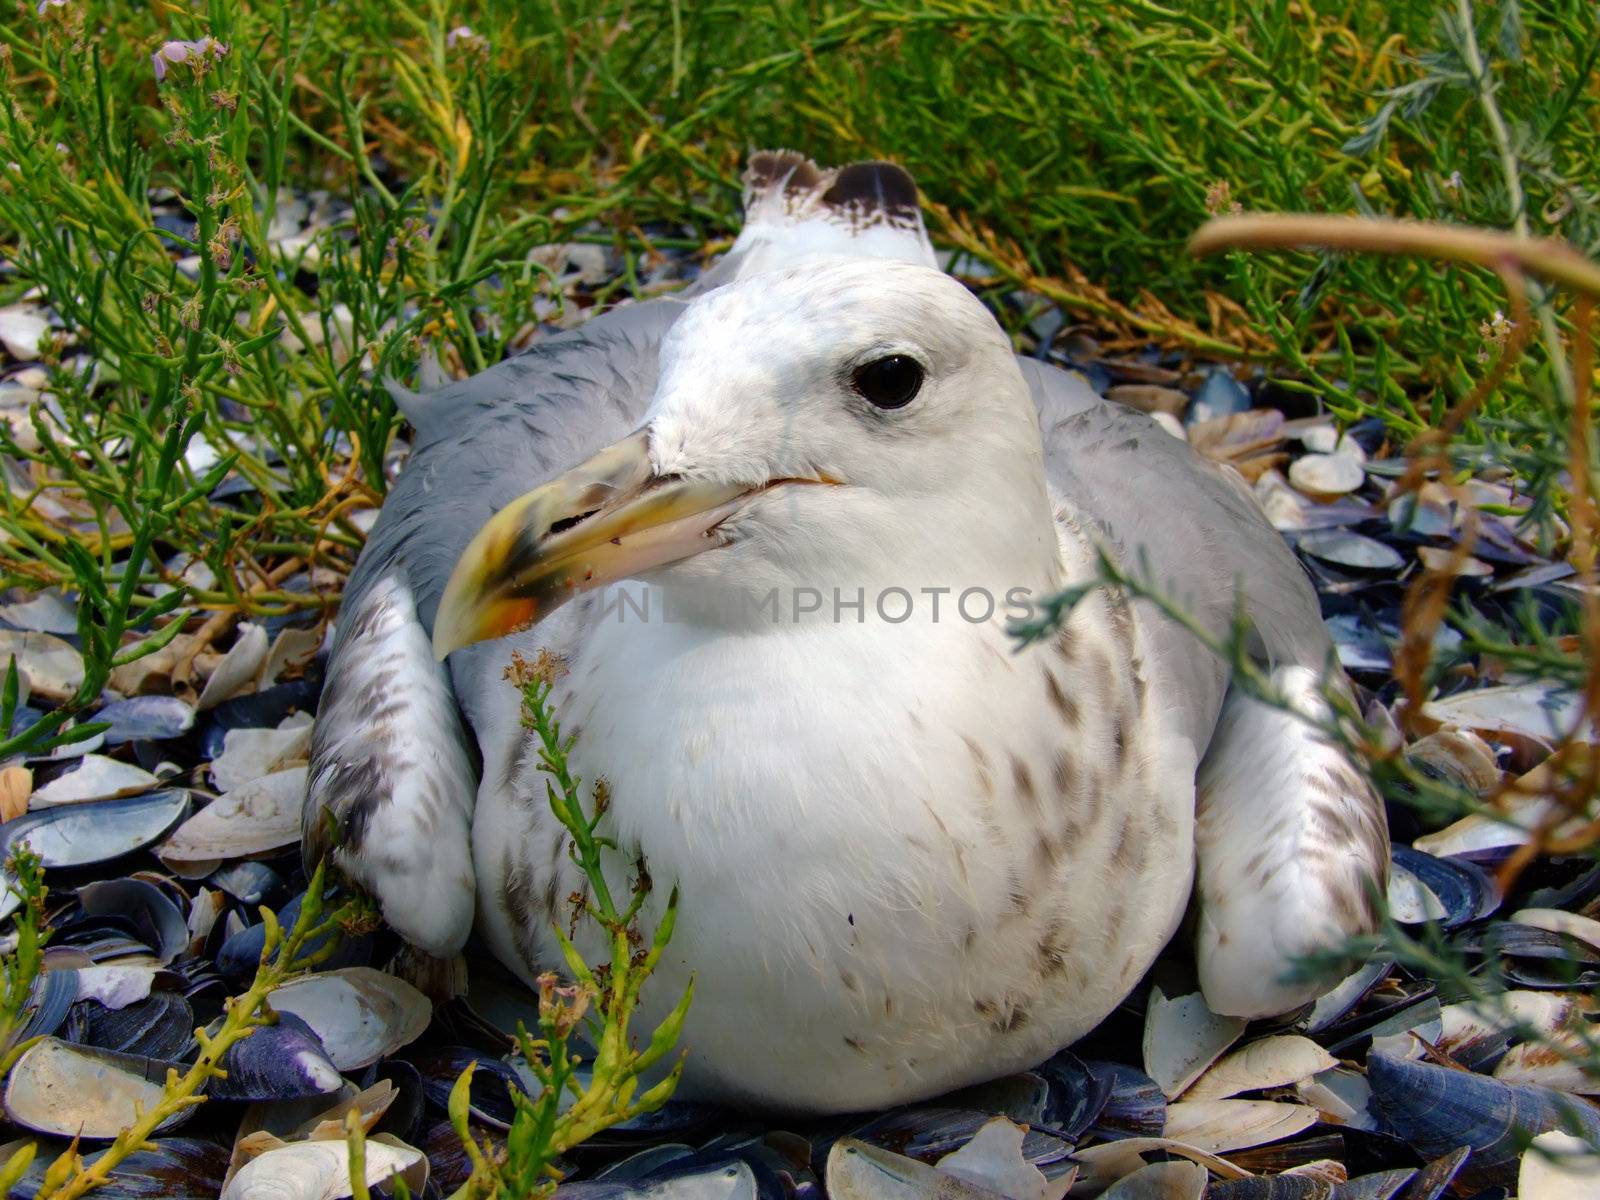 The seagull has a rest on a beach in seaweed by acidgrey